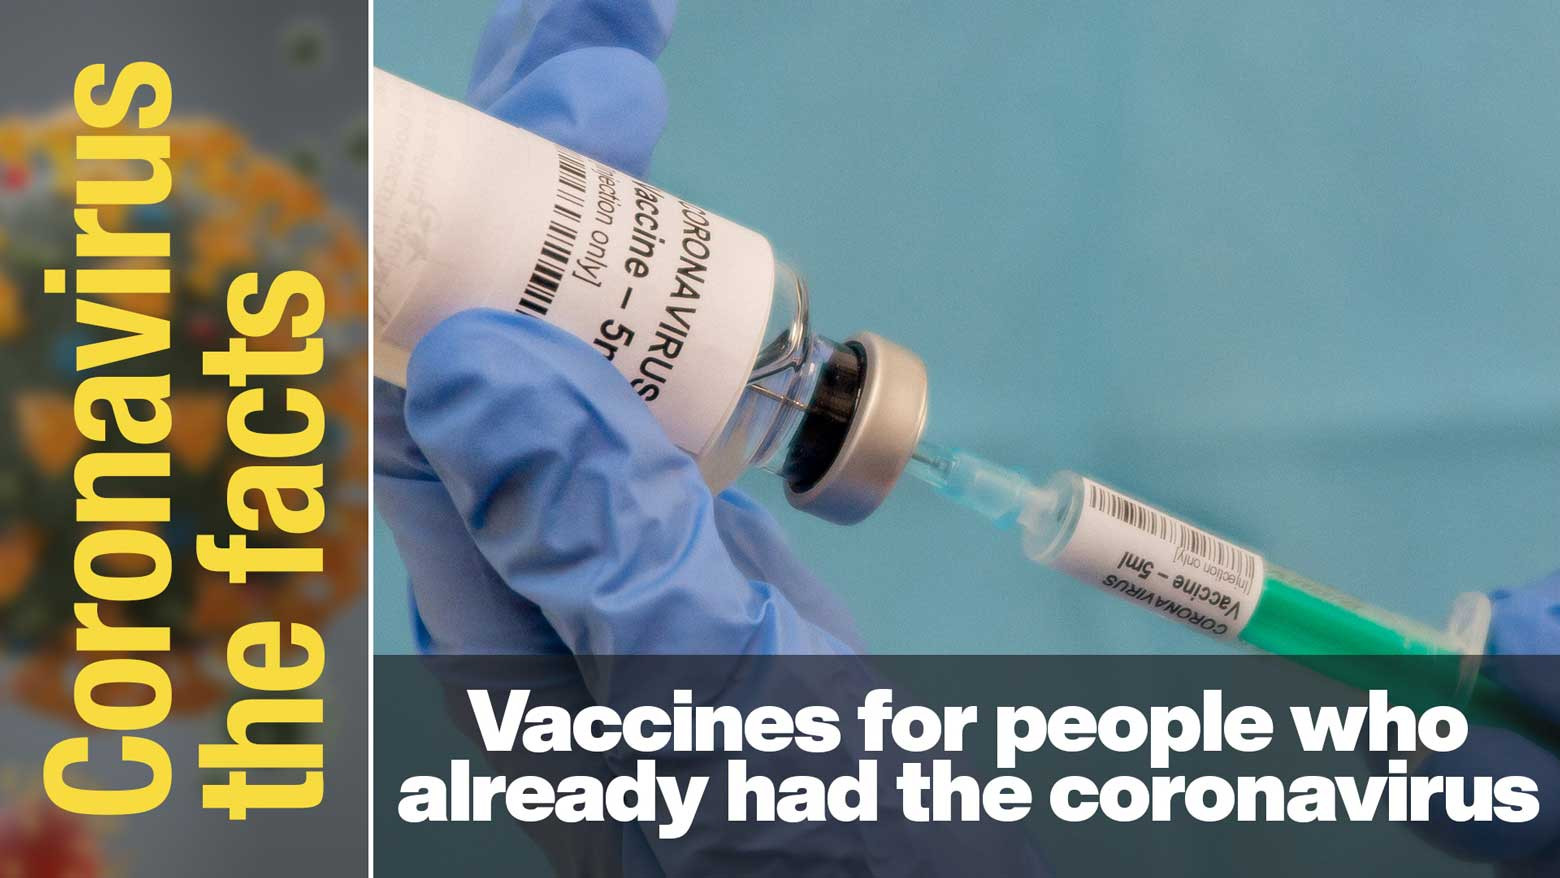 Do we have to get vaccinated if we already had COVID-19?